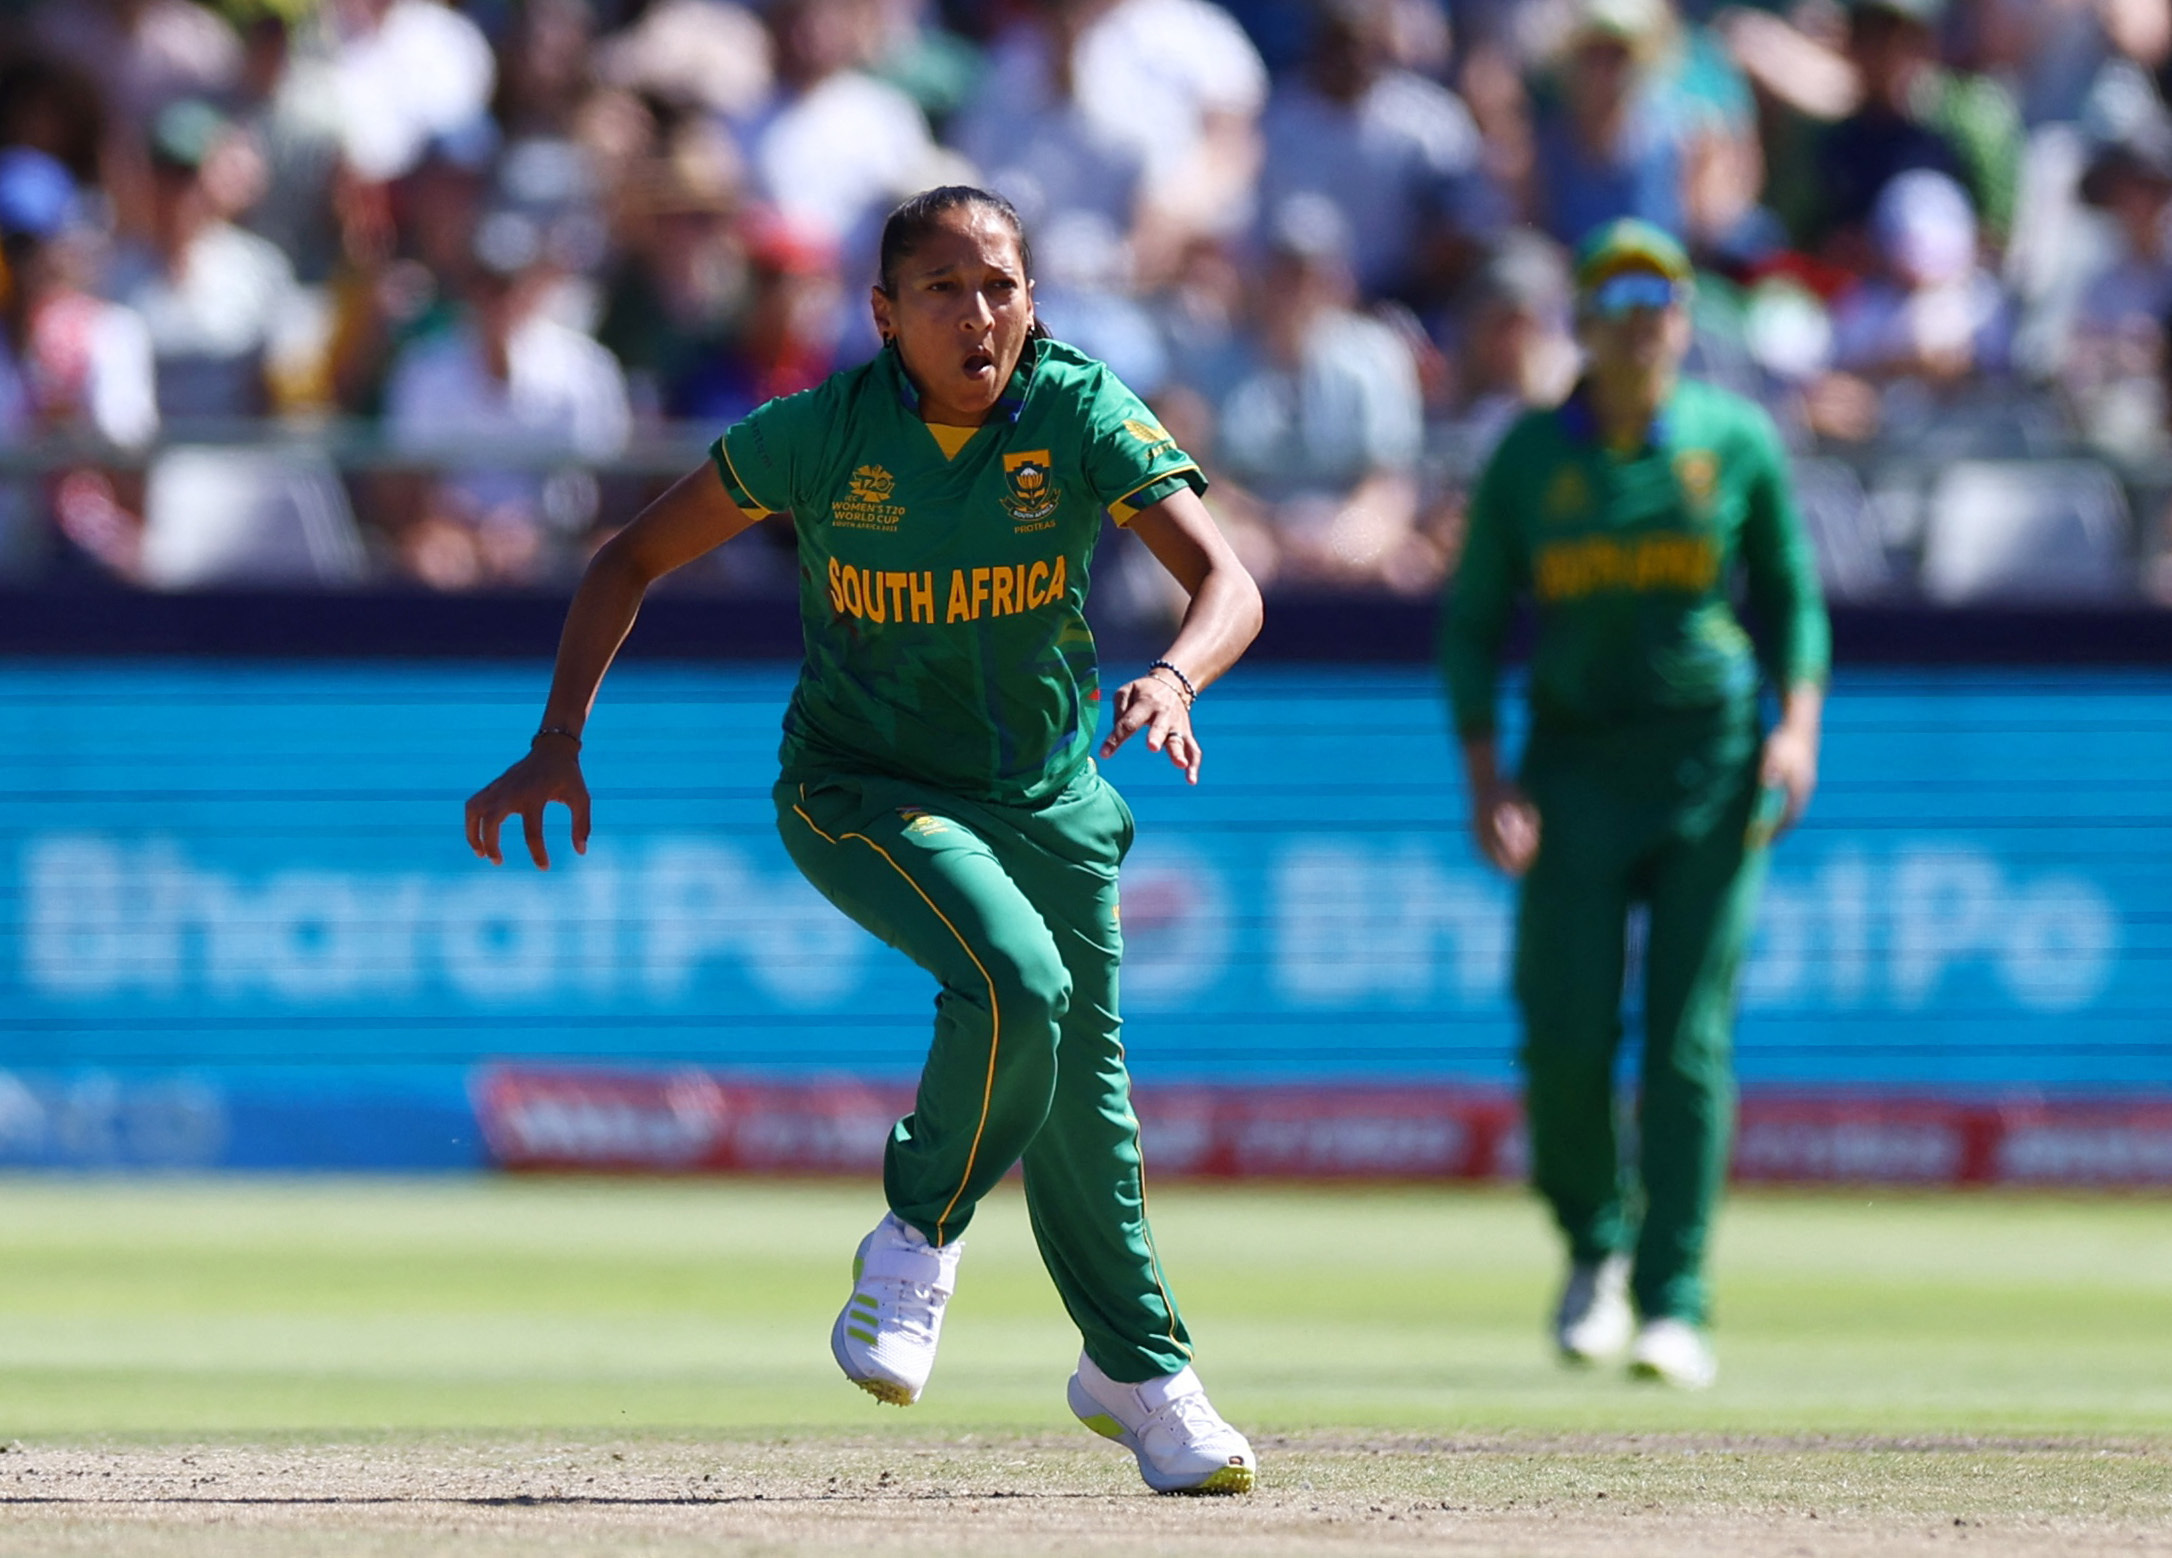 ICC Women’s Cricket T20 World Cup - Final - South Africa v Australia